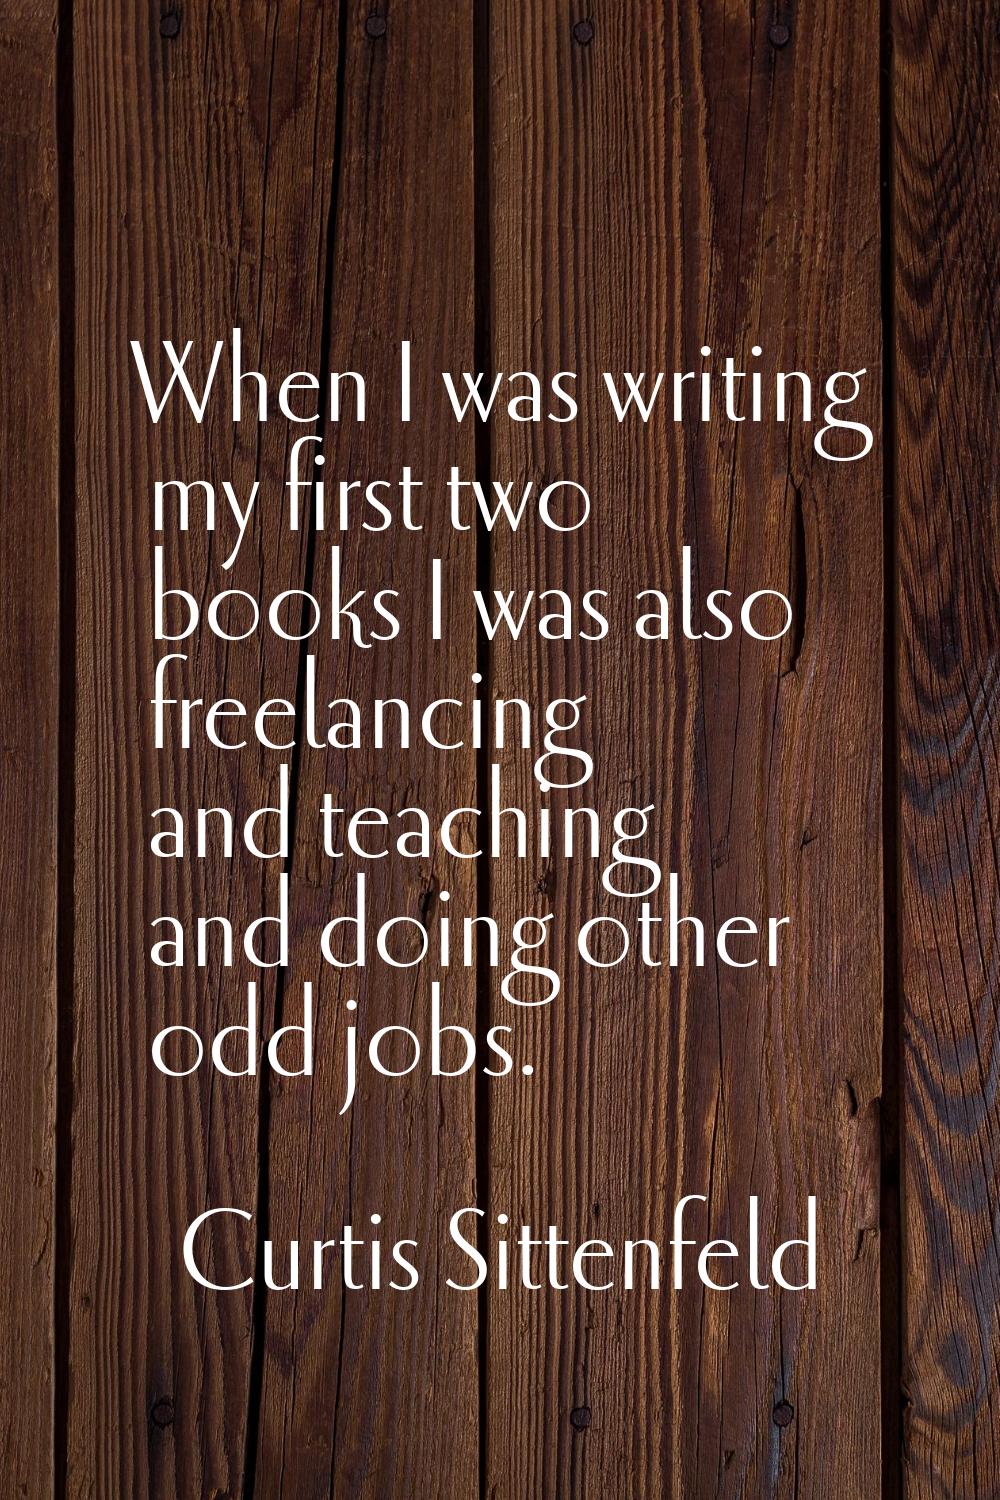 When I was writing my first two books I was also freelancing and teaching and doing other odd jobs.